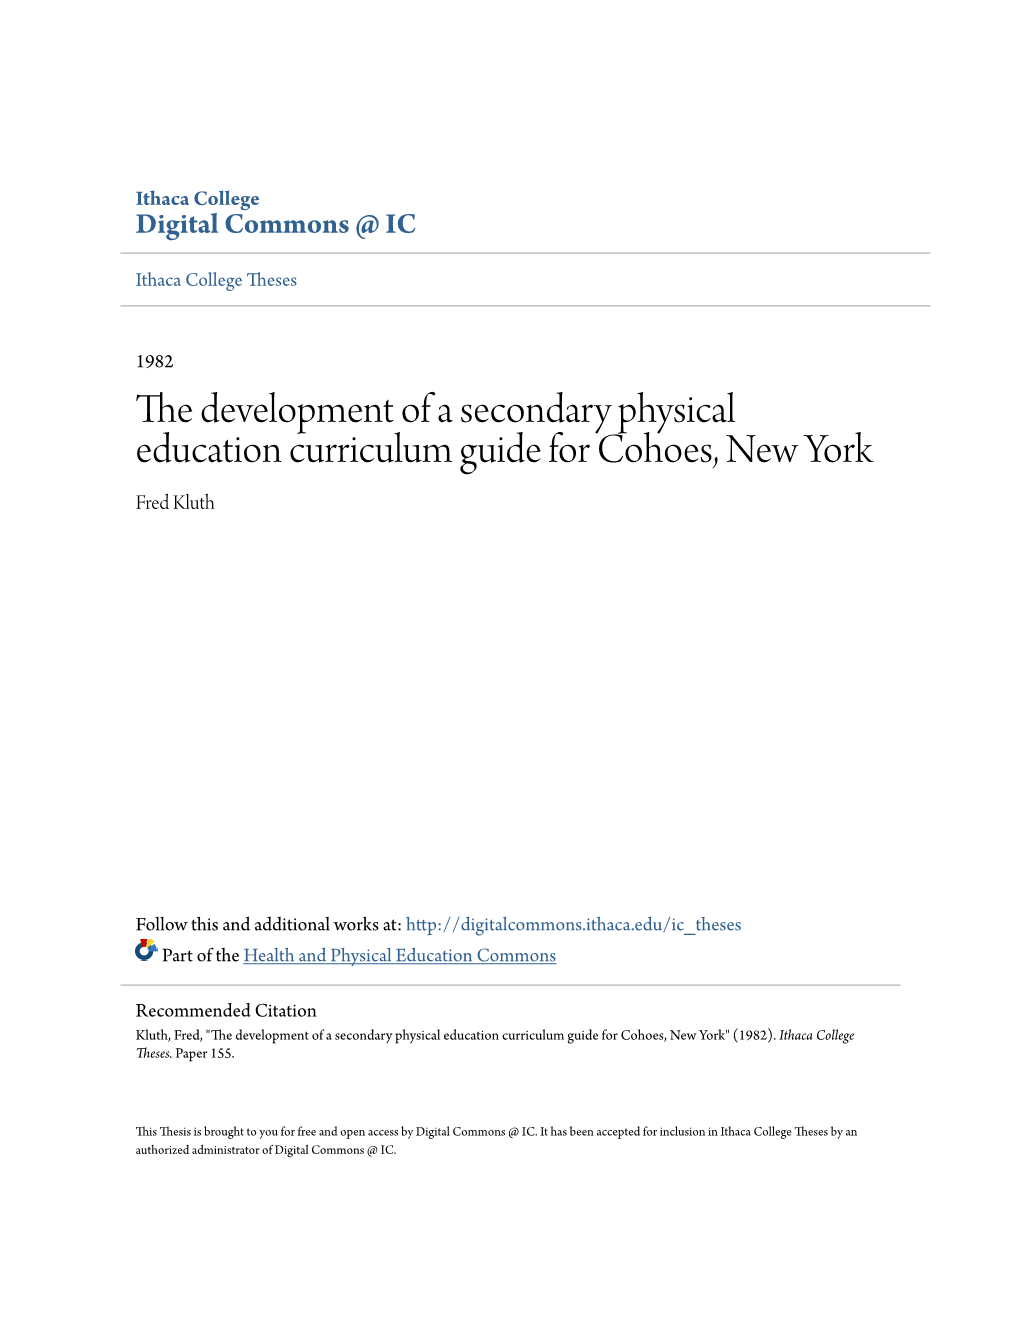 The Development of a Secondary Physical Education Curriculum Guide for Cohoes, New York Fred Kluth